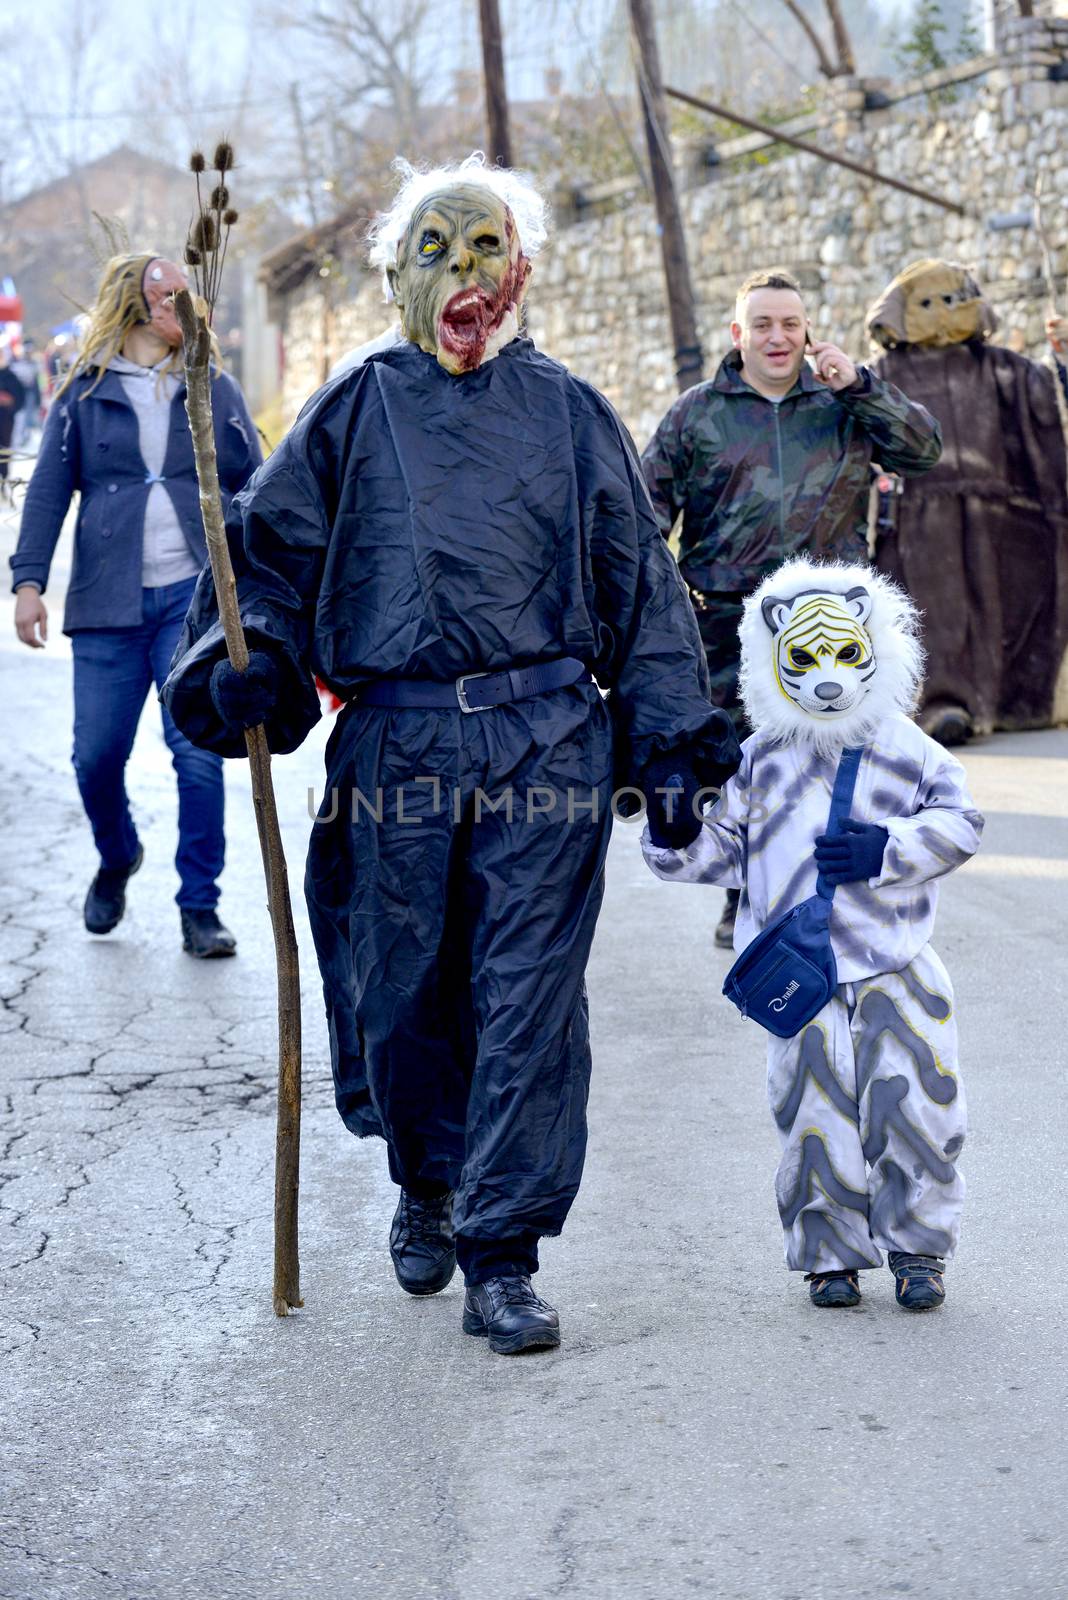 VEVCANI, MACEDONIA - 13 JANUARY , 2020: General atmosphere with dressed up participants at an annual Vevcani Carnival, in southwestern Macedonia, by nehru